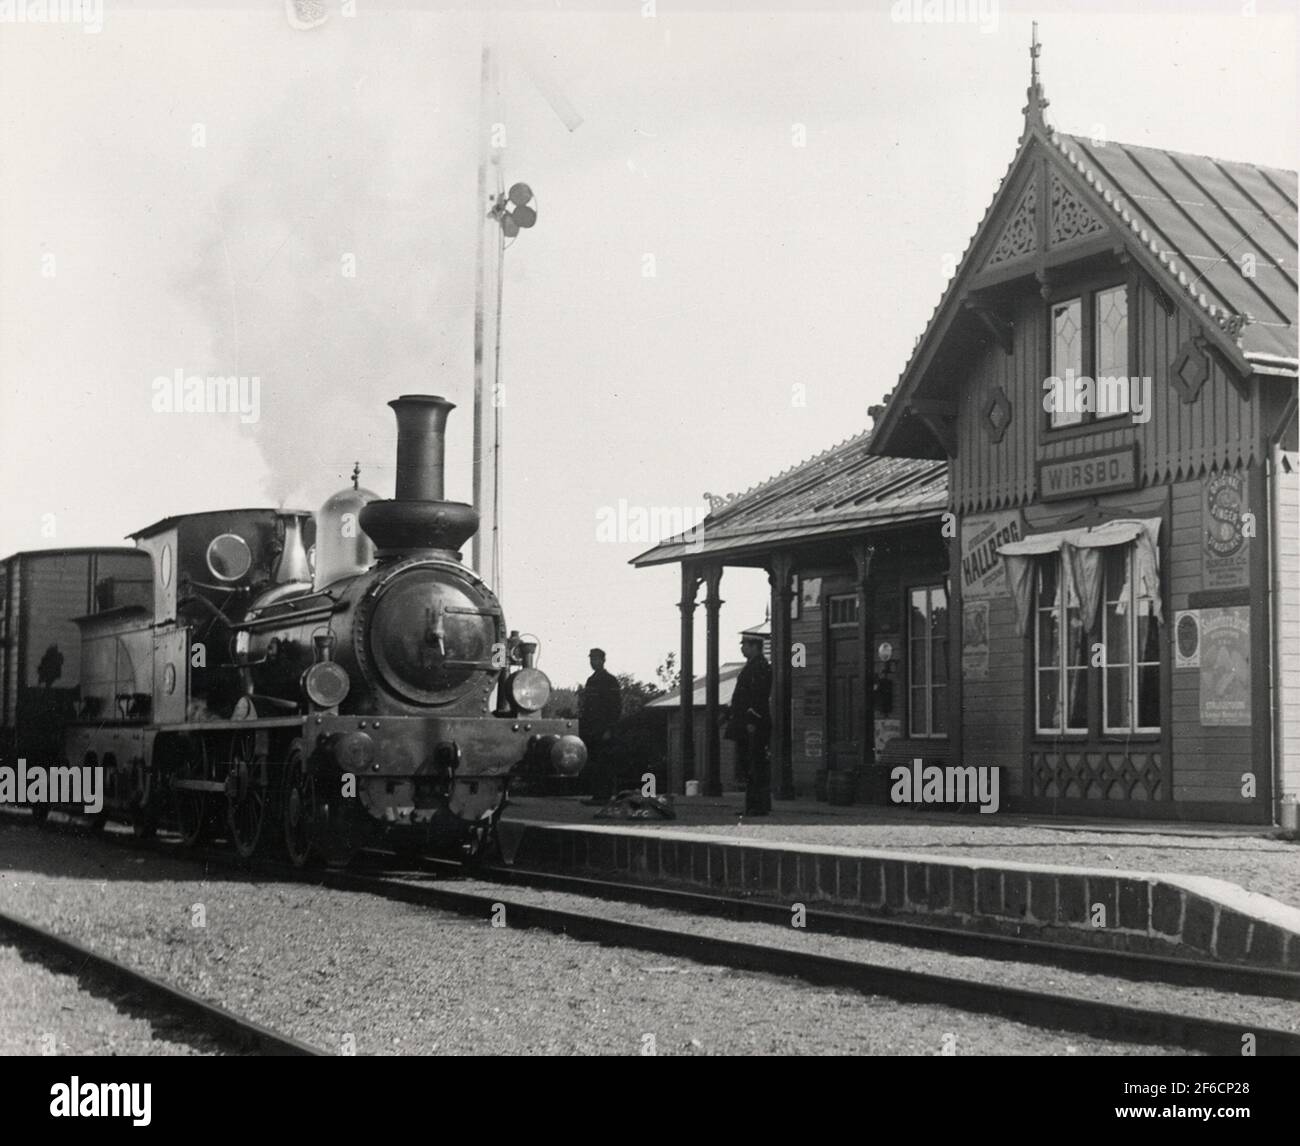 SWB A 4 at Virsbo Station. In service 1873-1924 F.D. Sala-toberg rail no. 2. Manufacturing NR 2349 Firma Sharp, Stewart & Co in Manchester. No. 4 Got new boiler 1914. The station maker is Gustaf Alfred Fors born 17/1 1857. The man on the left is station Karl No. 252 Oskar Larsson Born 21/3 1875. Stock Photo